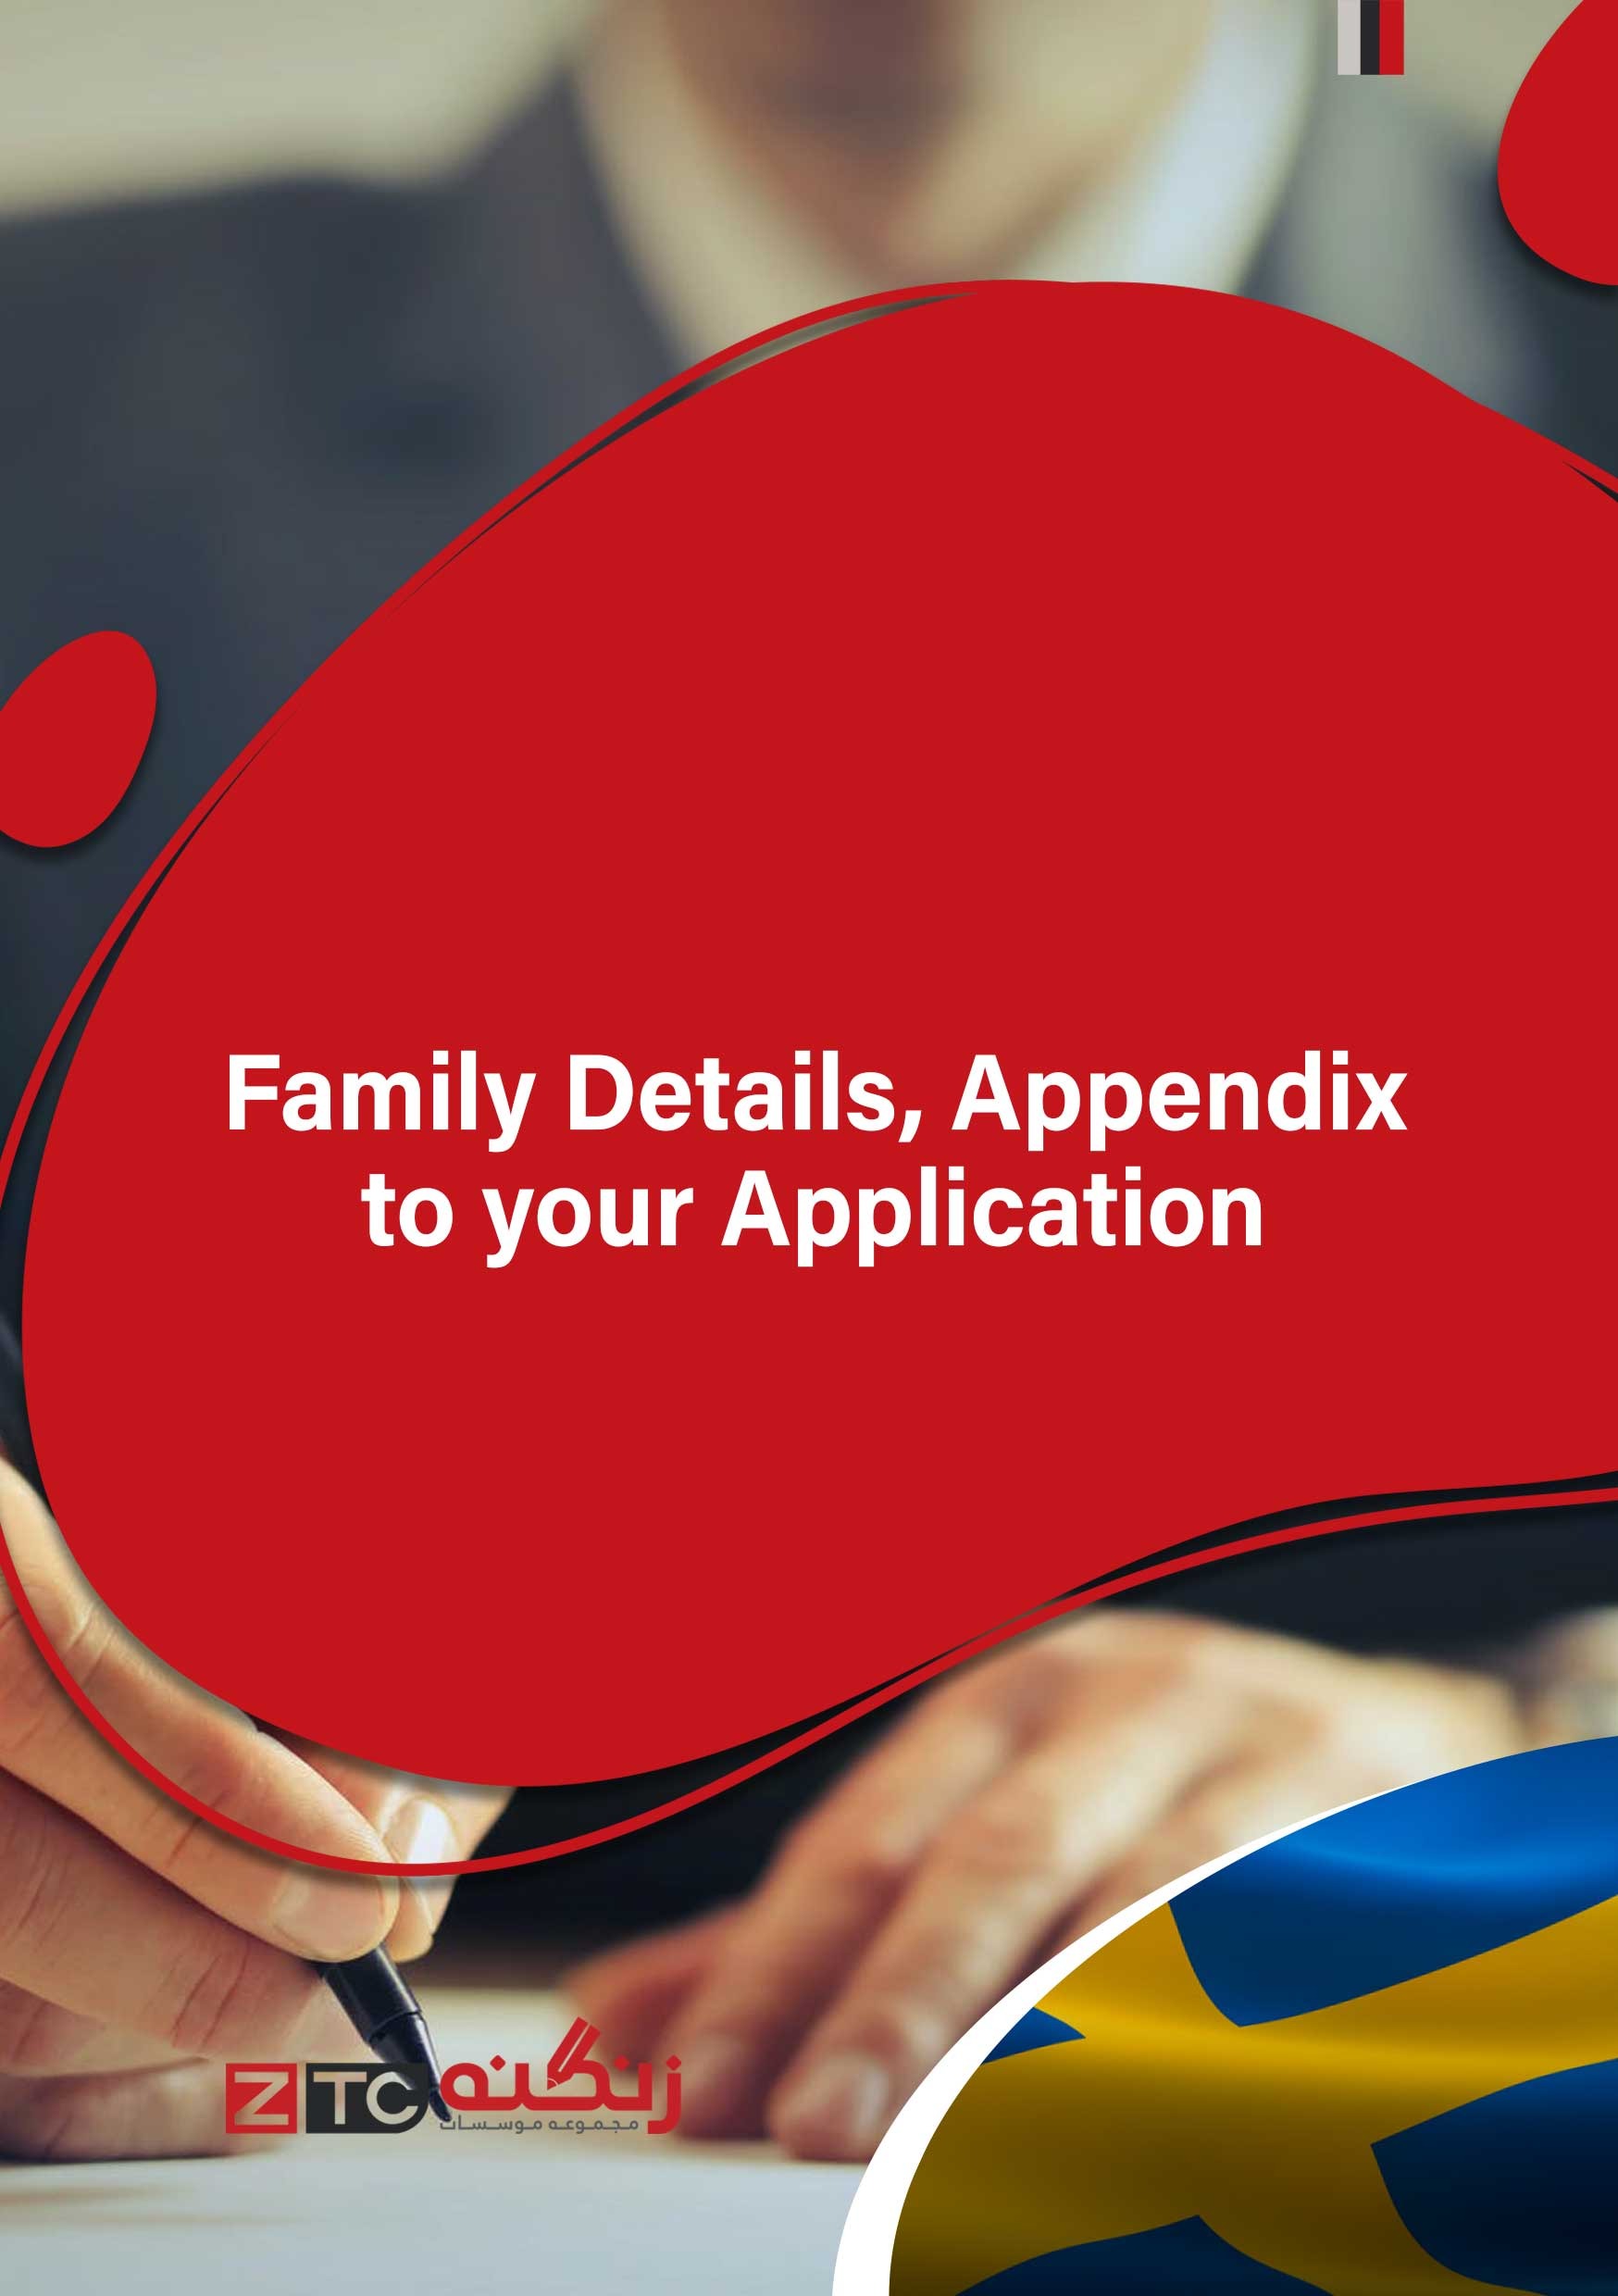 Family Details, Appendix to your Application